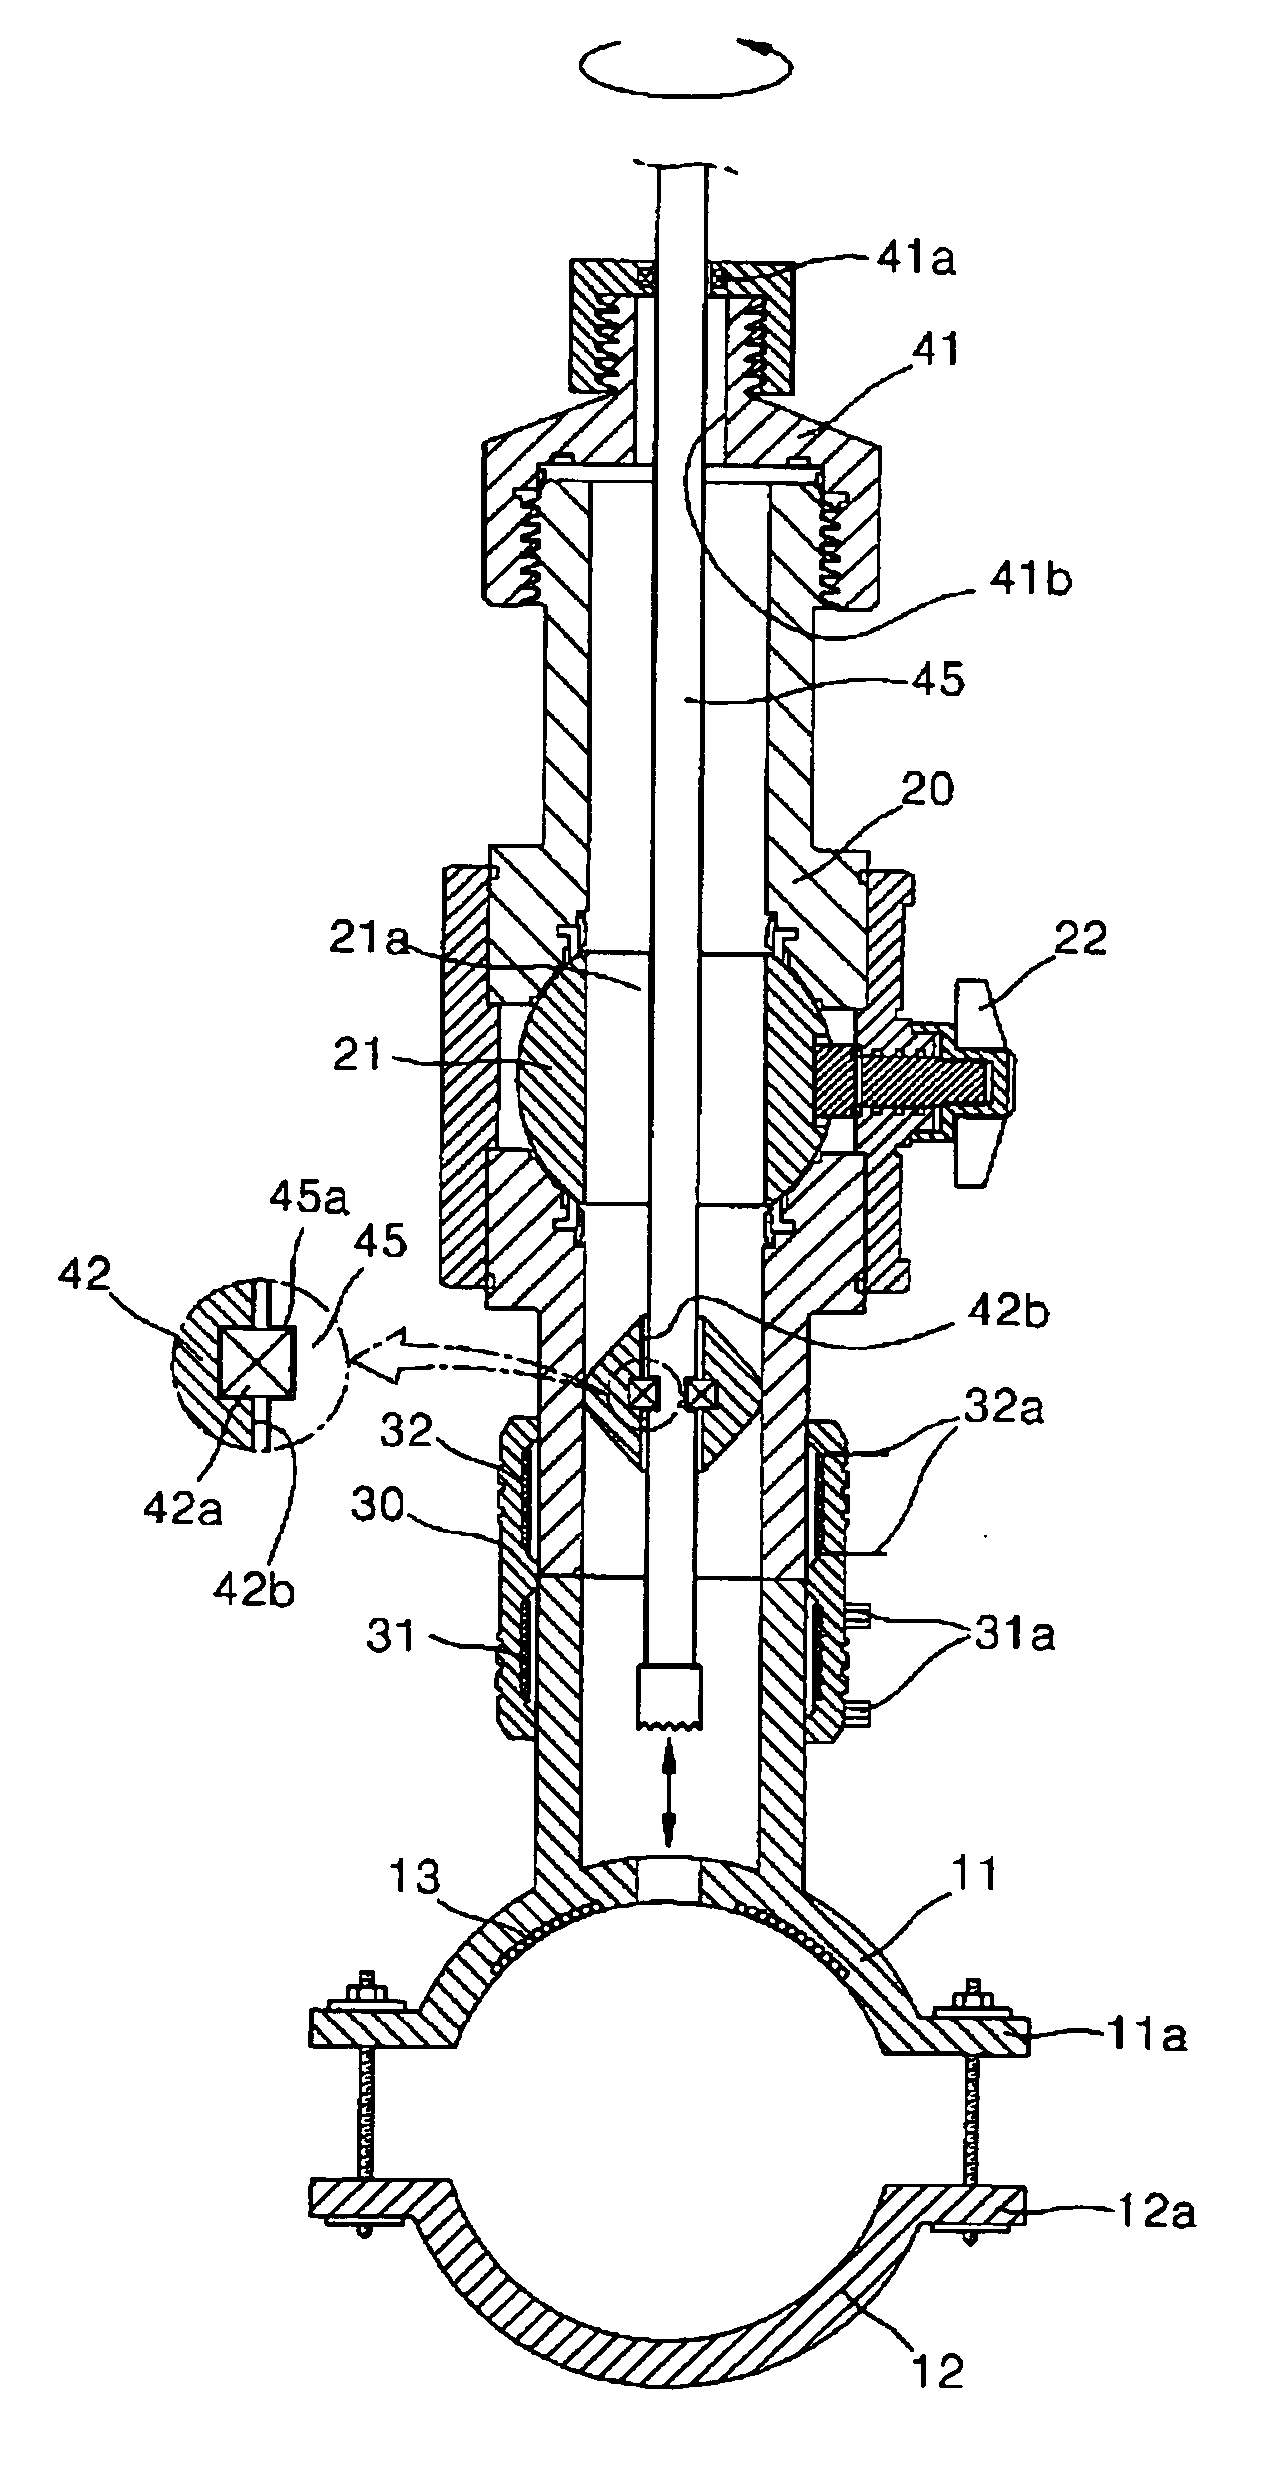 Pipe tapping apparatus